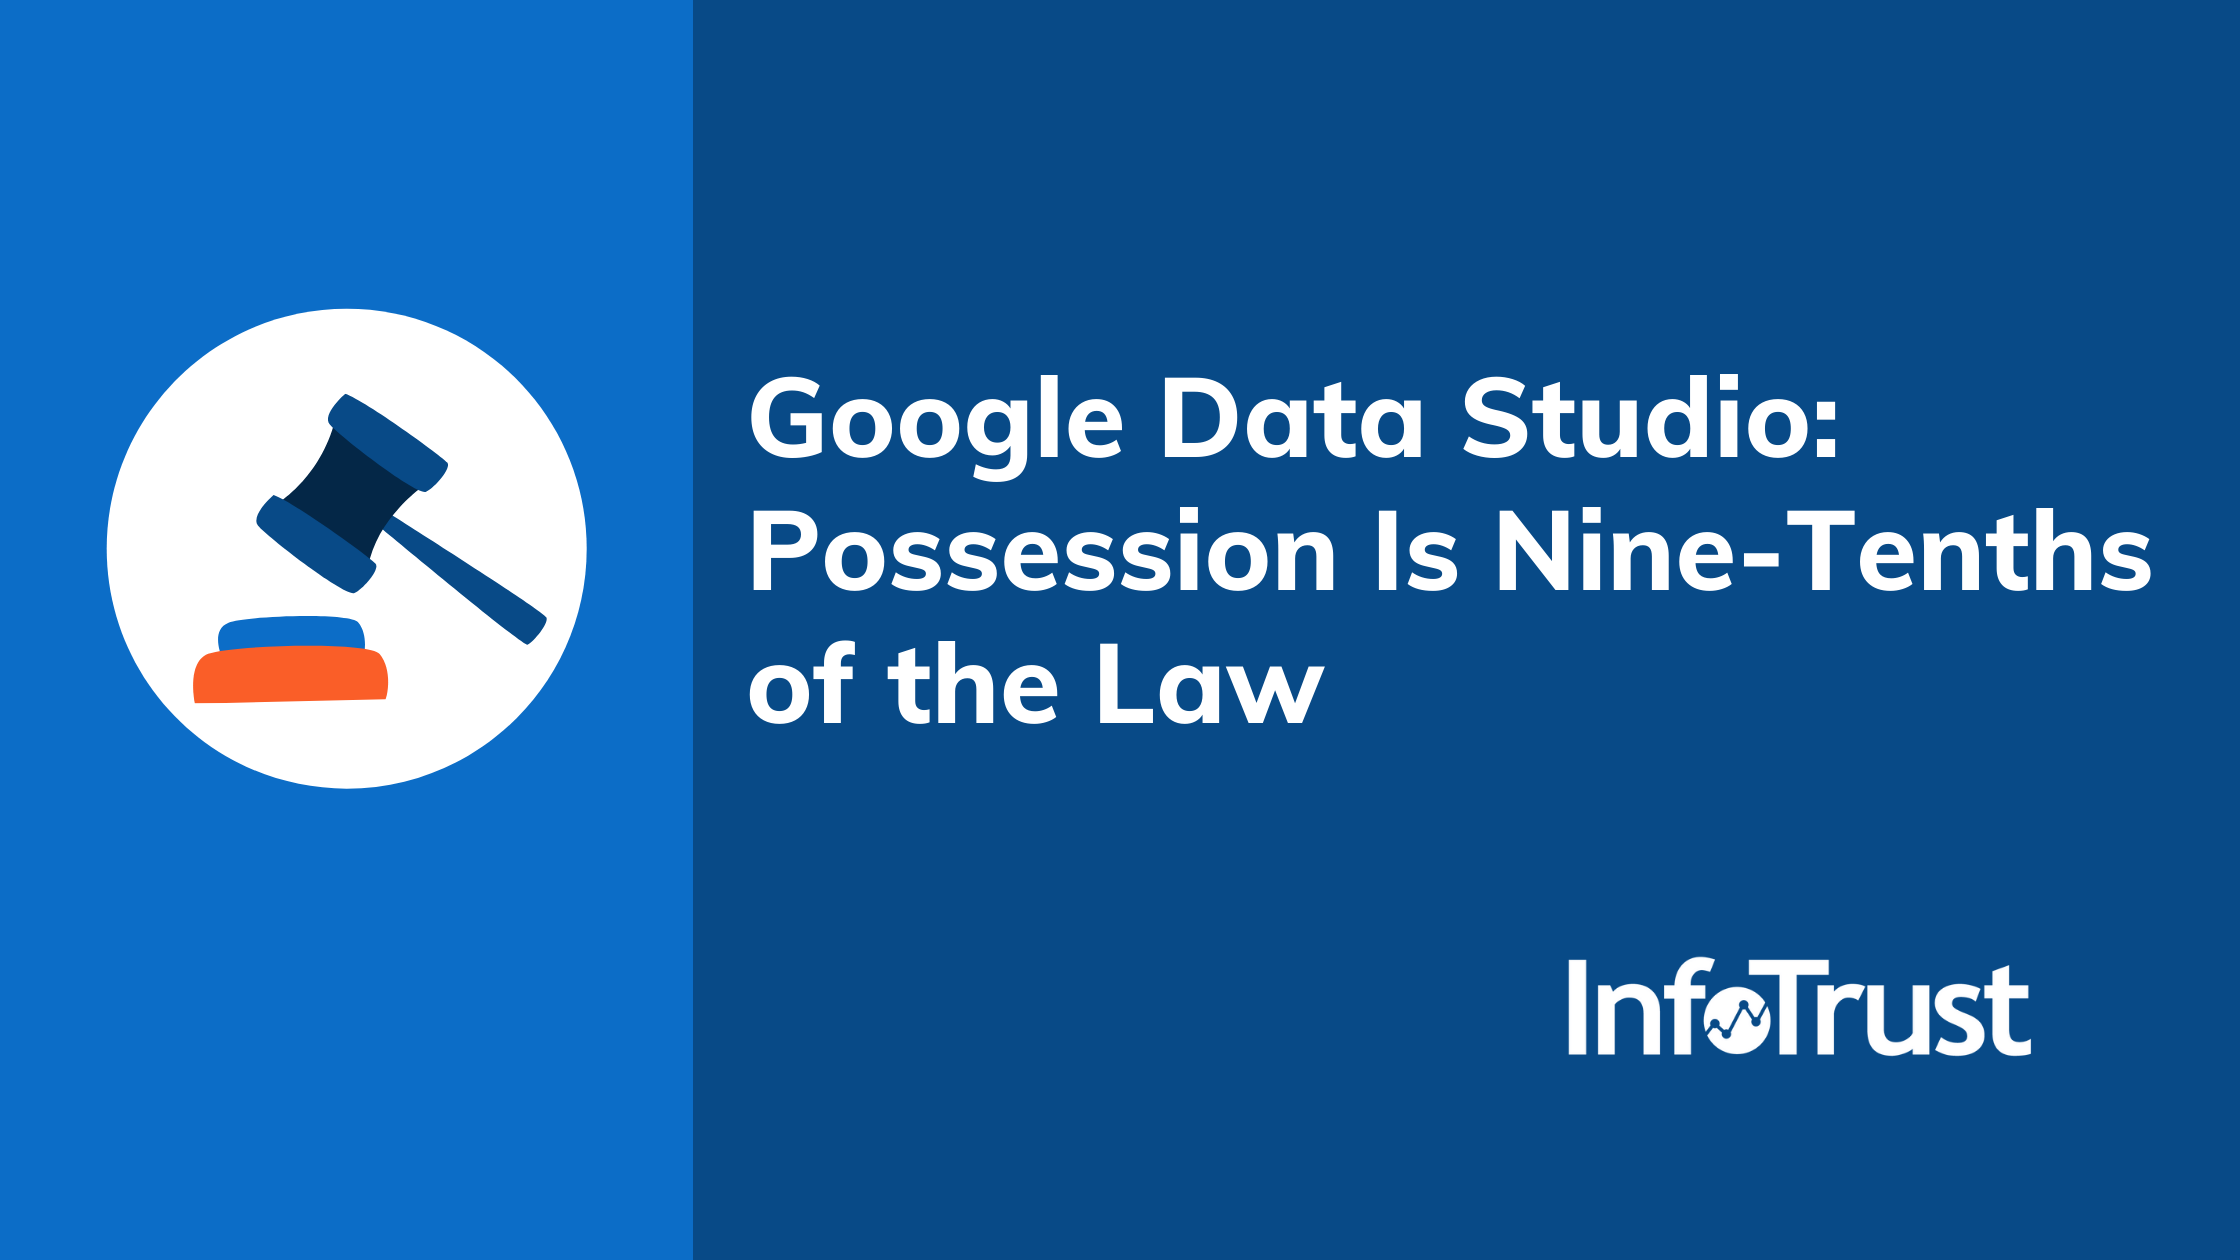 Google Data Studio: Possession Is Nine-Tenths of the Law